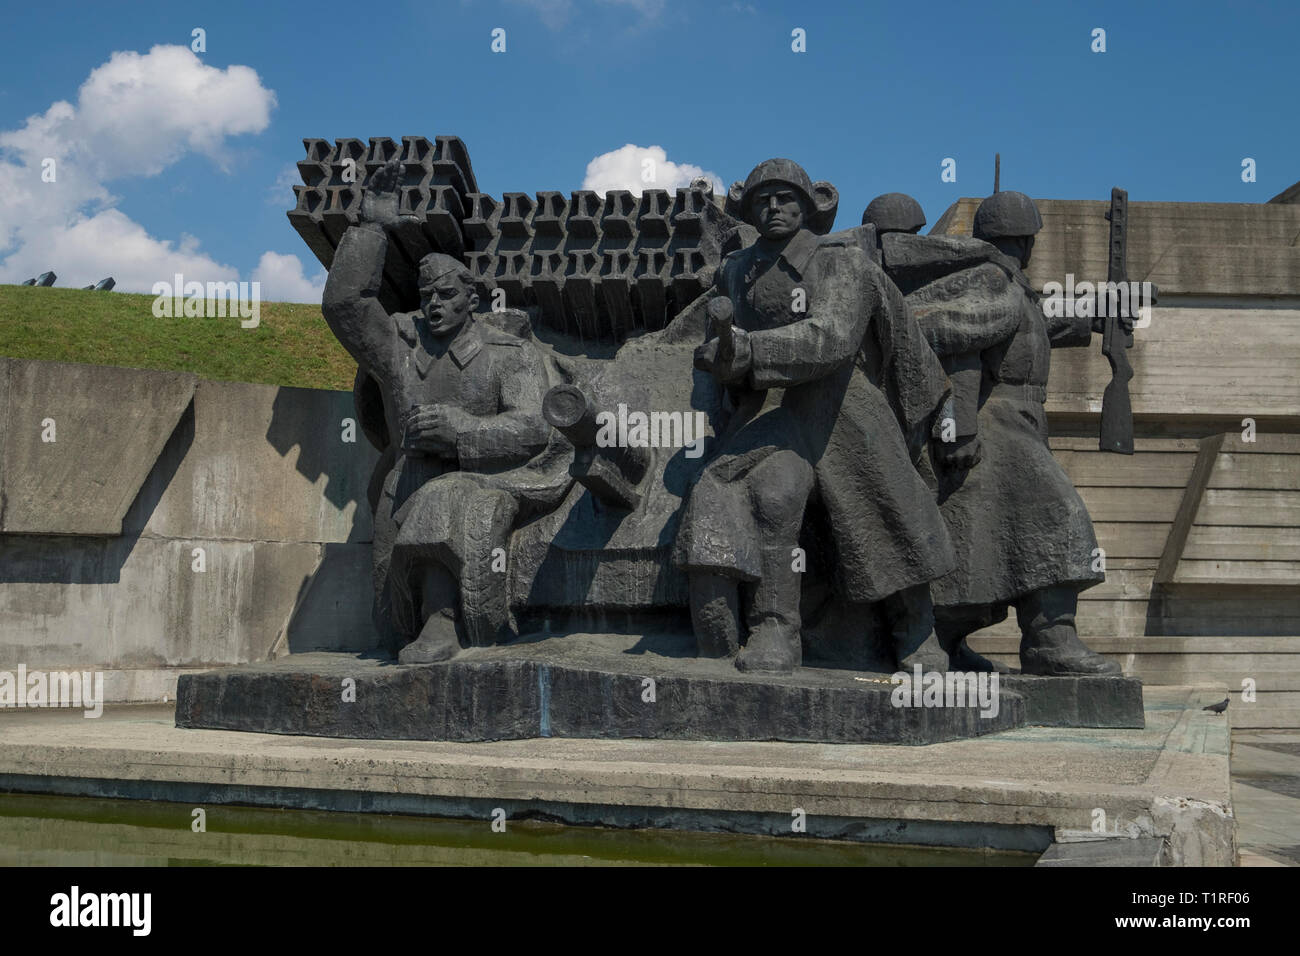 Large bronze sculpture that depicts Ukraine's epic fight, crossing the Dnieper river against the Germans in WWII. In Kiev, Ukraine. Stock Photo